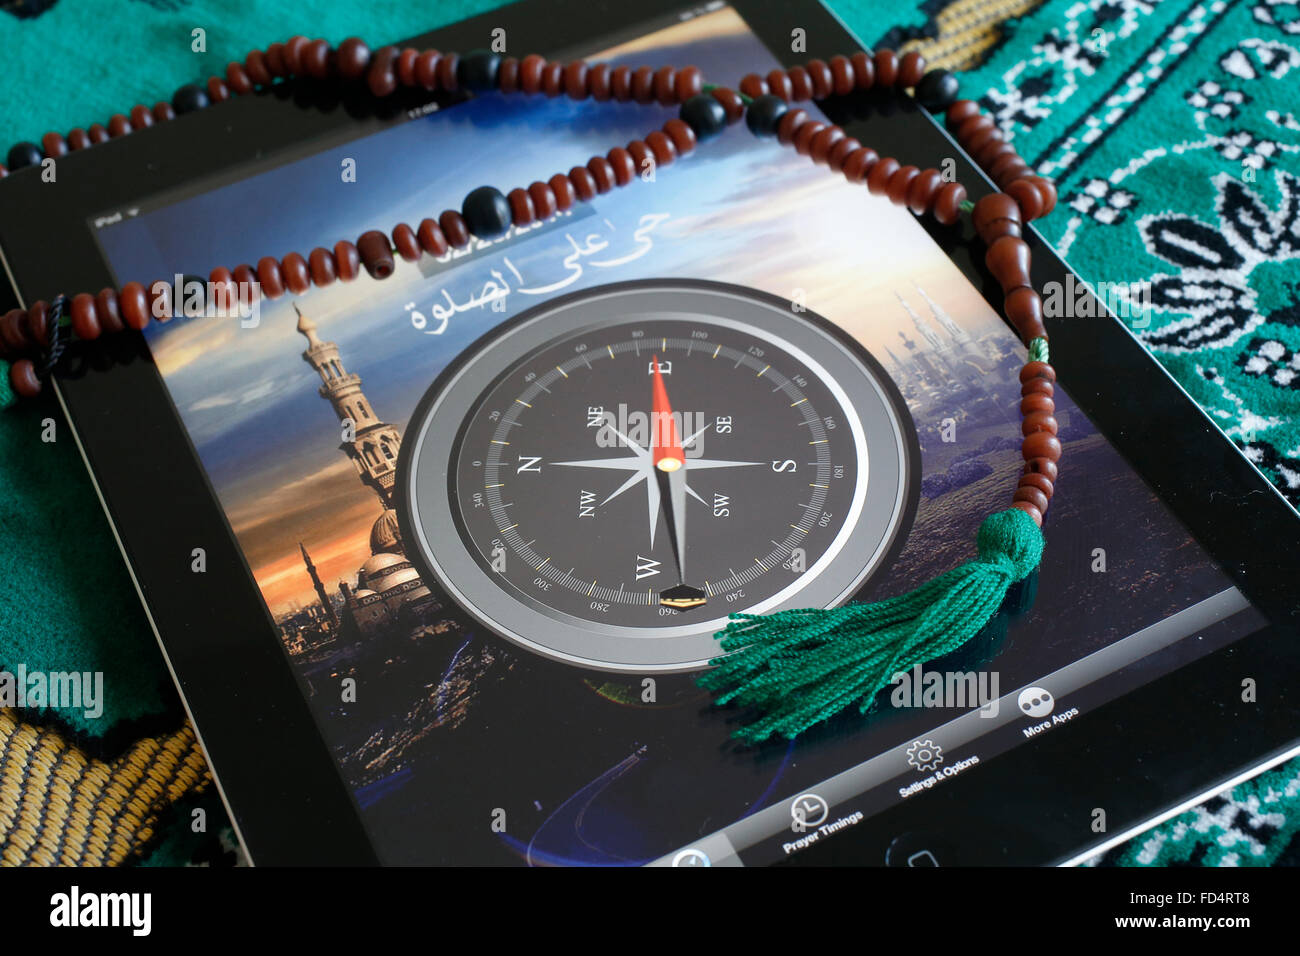 Islamic compass on an Ipad. Qibla compass used by Muslims to indicate the direction of Mecca. Stock Photo